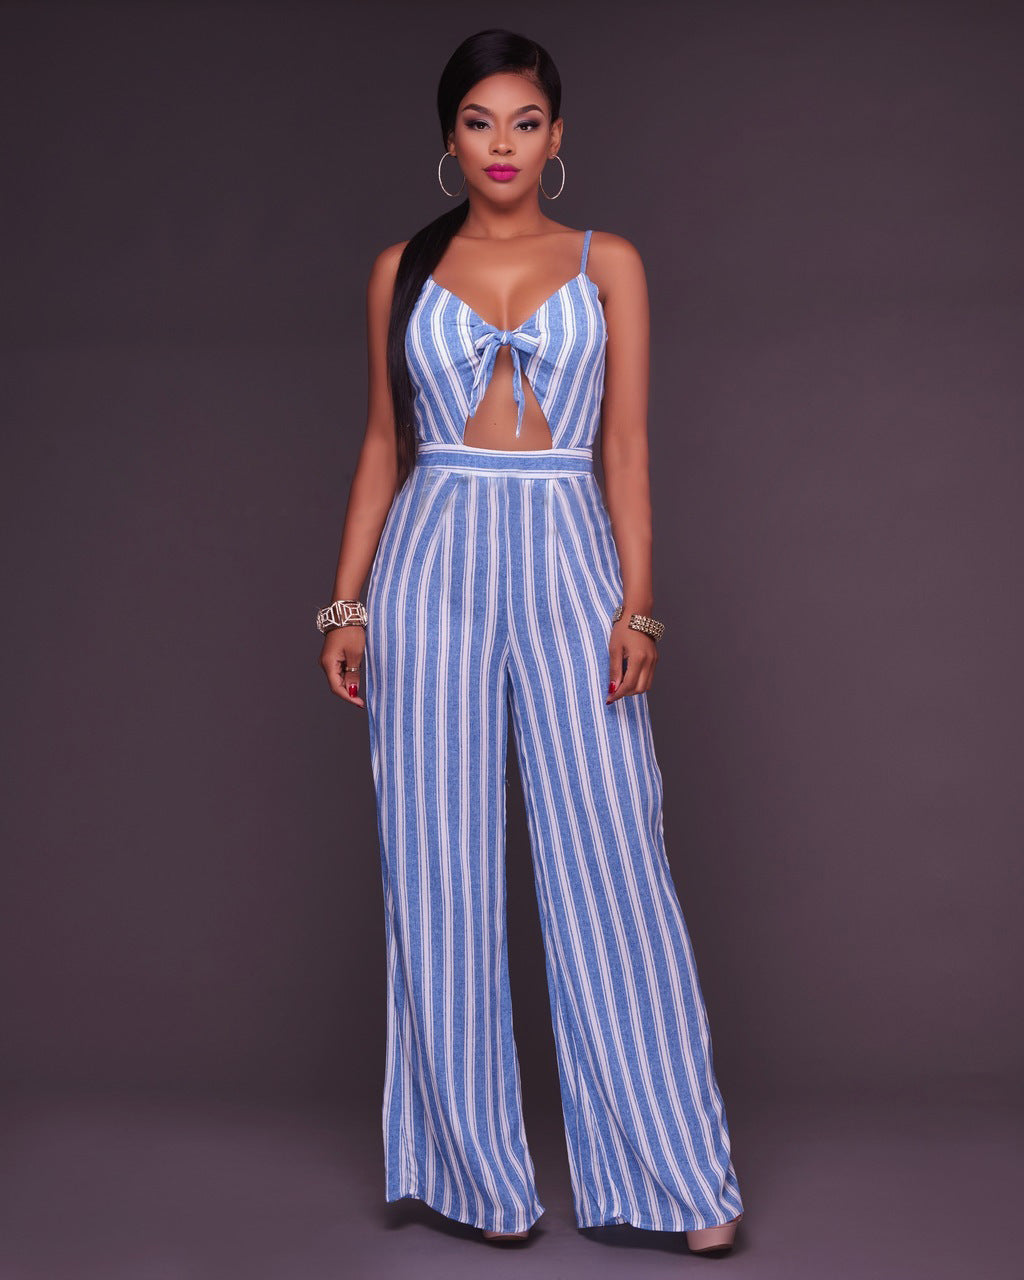 Stripped Loose Fitting Jumpsuit